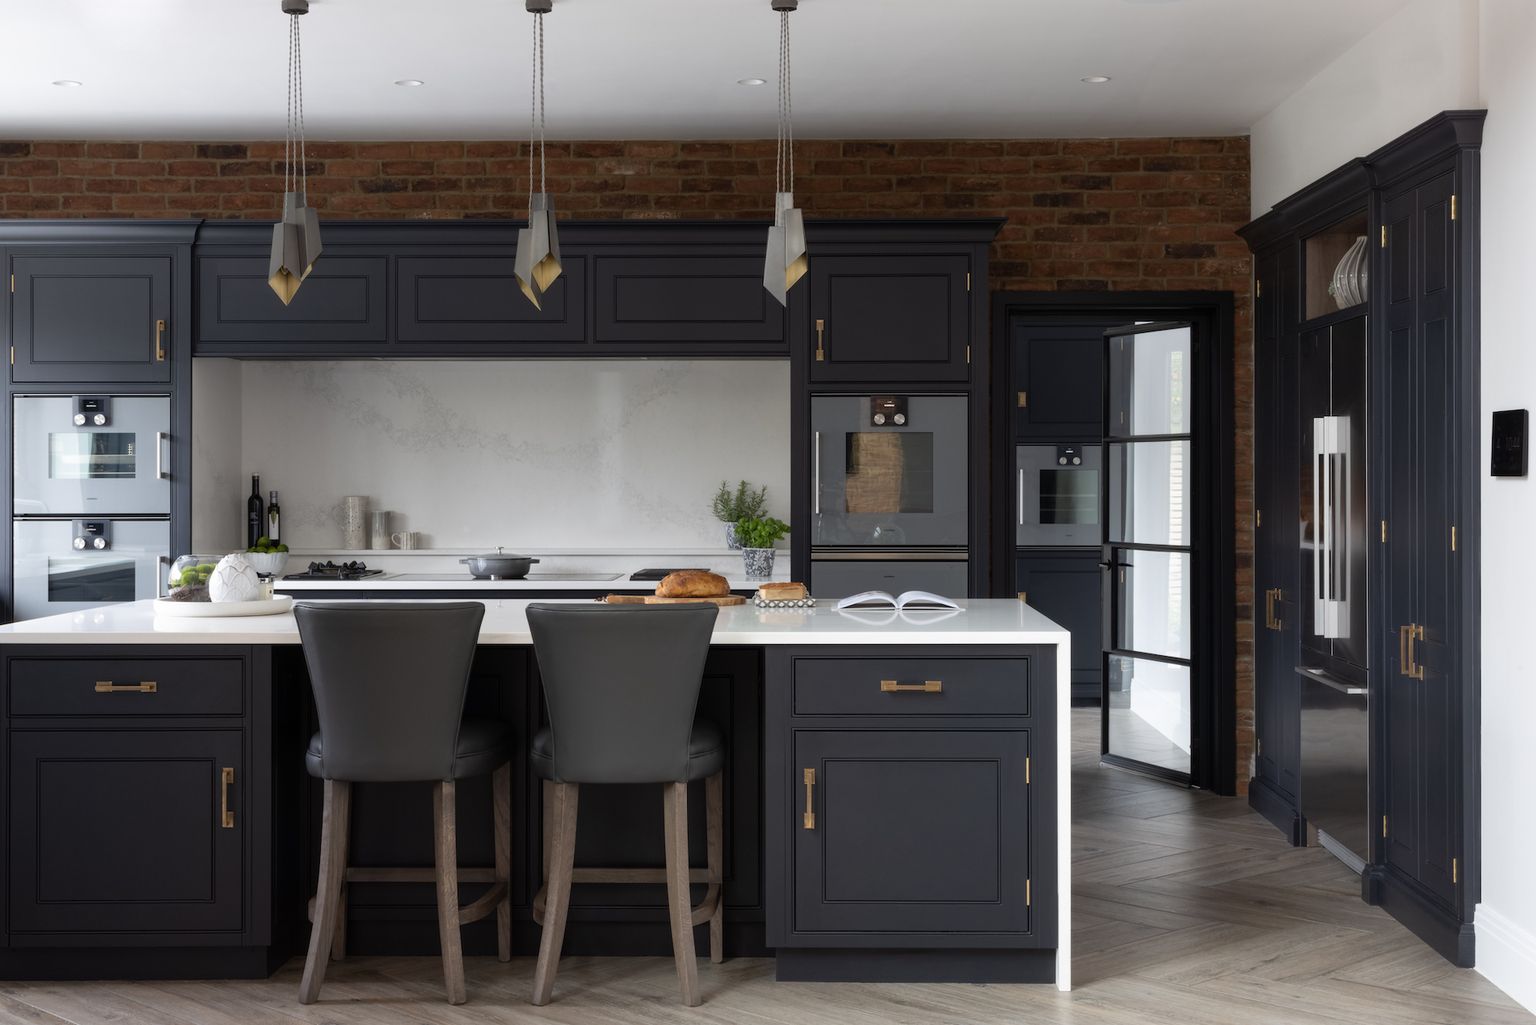 3 Reasons Why Caesarstone is a Dream Kitchen Essential